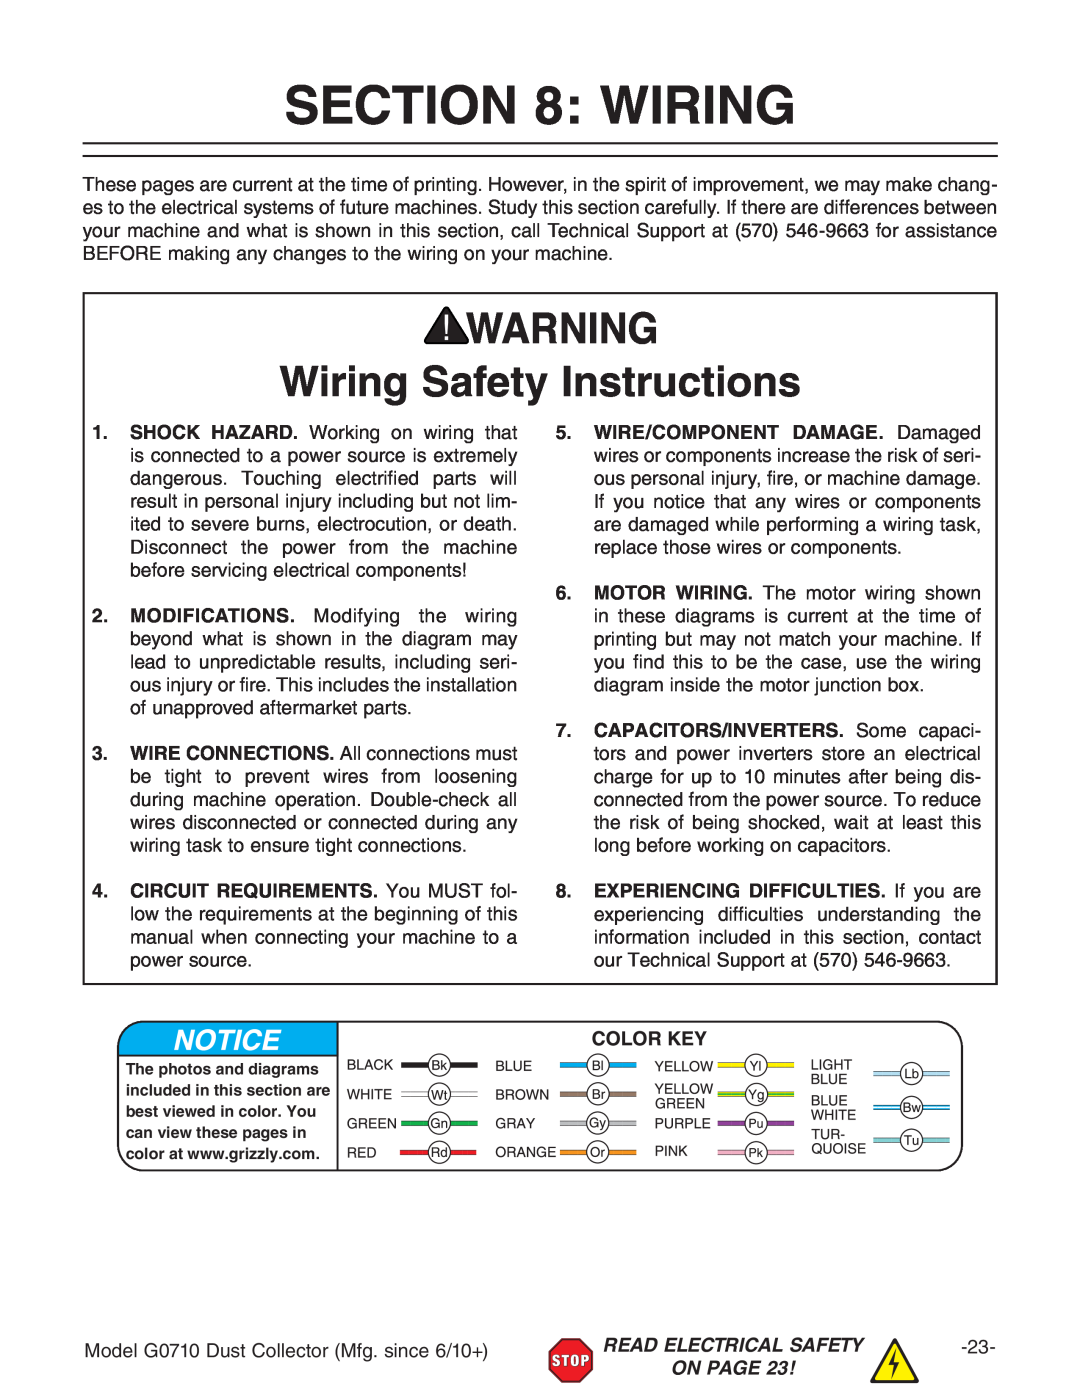 Grizzly G0710 owner manual Wiring Safety Instructions 